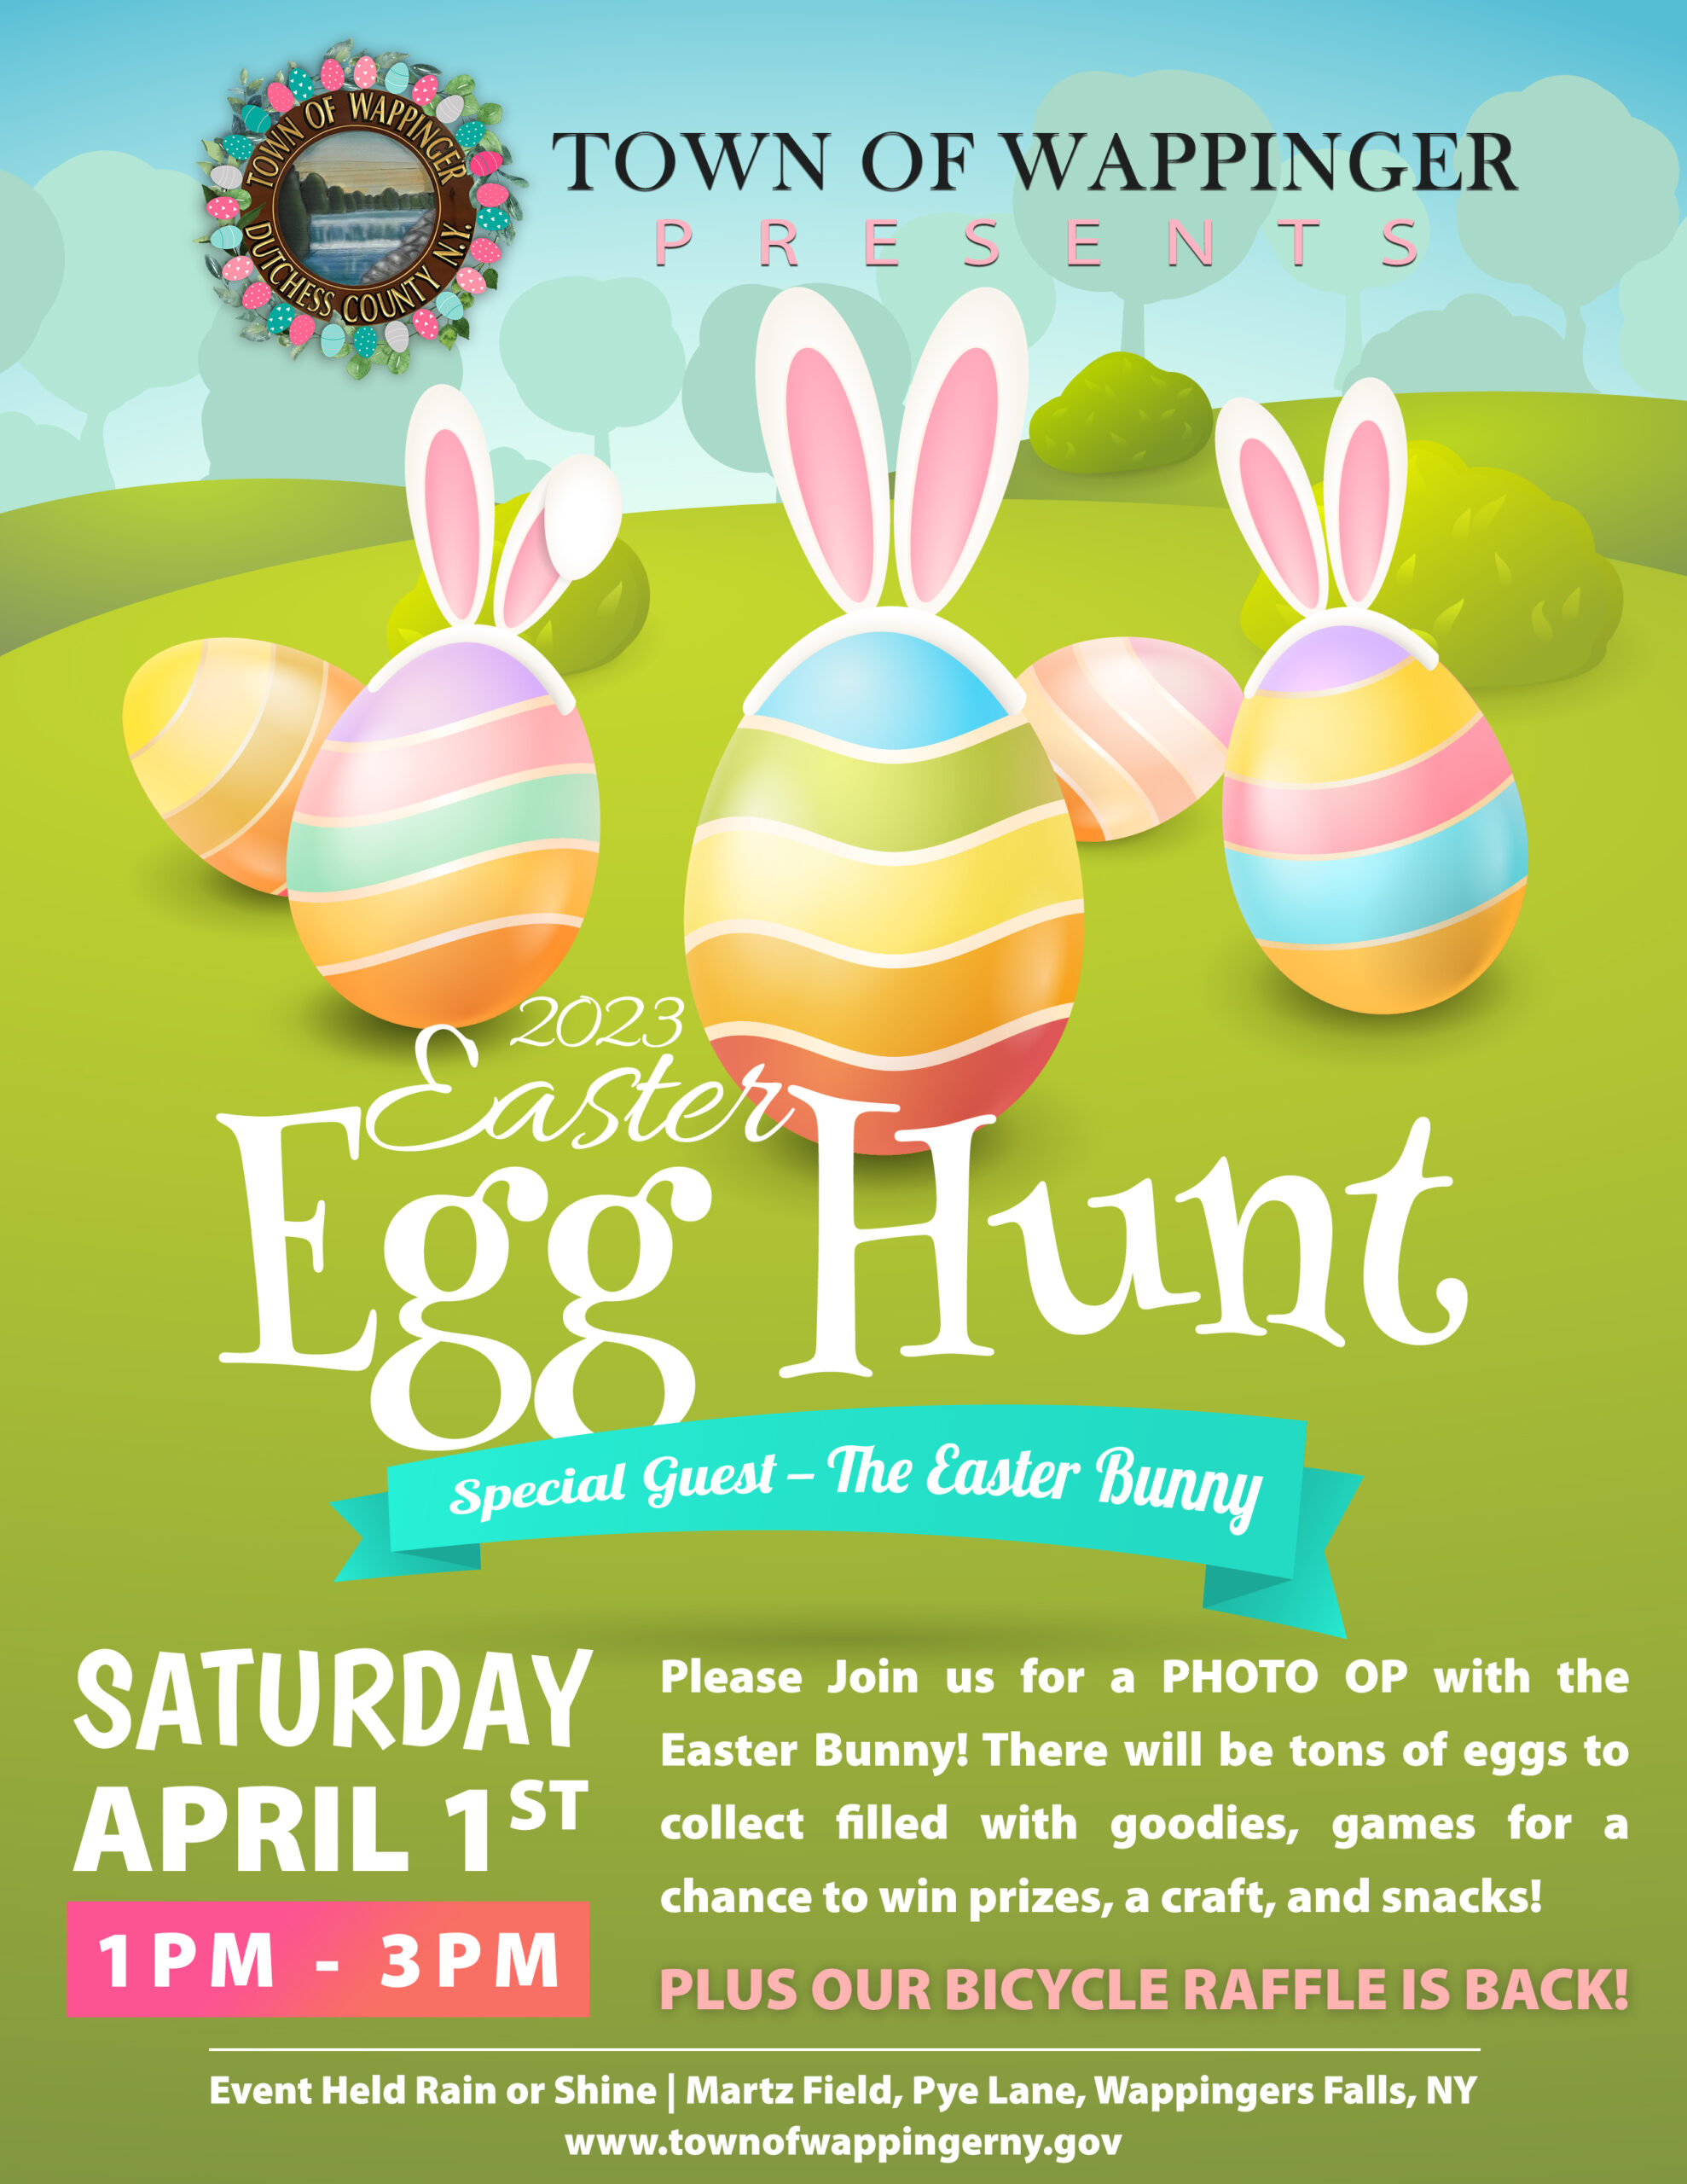 https://townofwappingerny.gov/wp-content/uploads/2023/03/2023-Town-of-Wappinger-Easter-Egg-Hunt-scaled.jpg